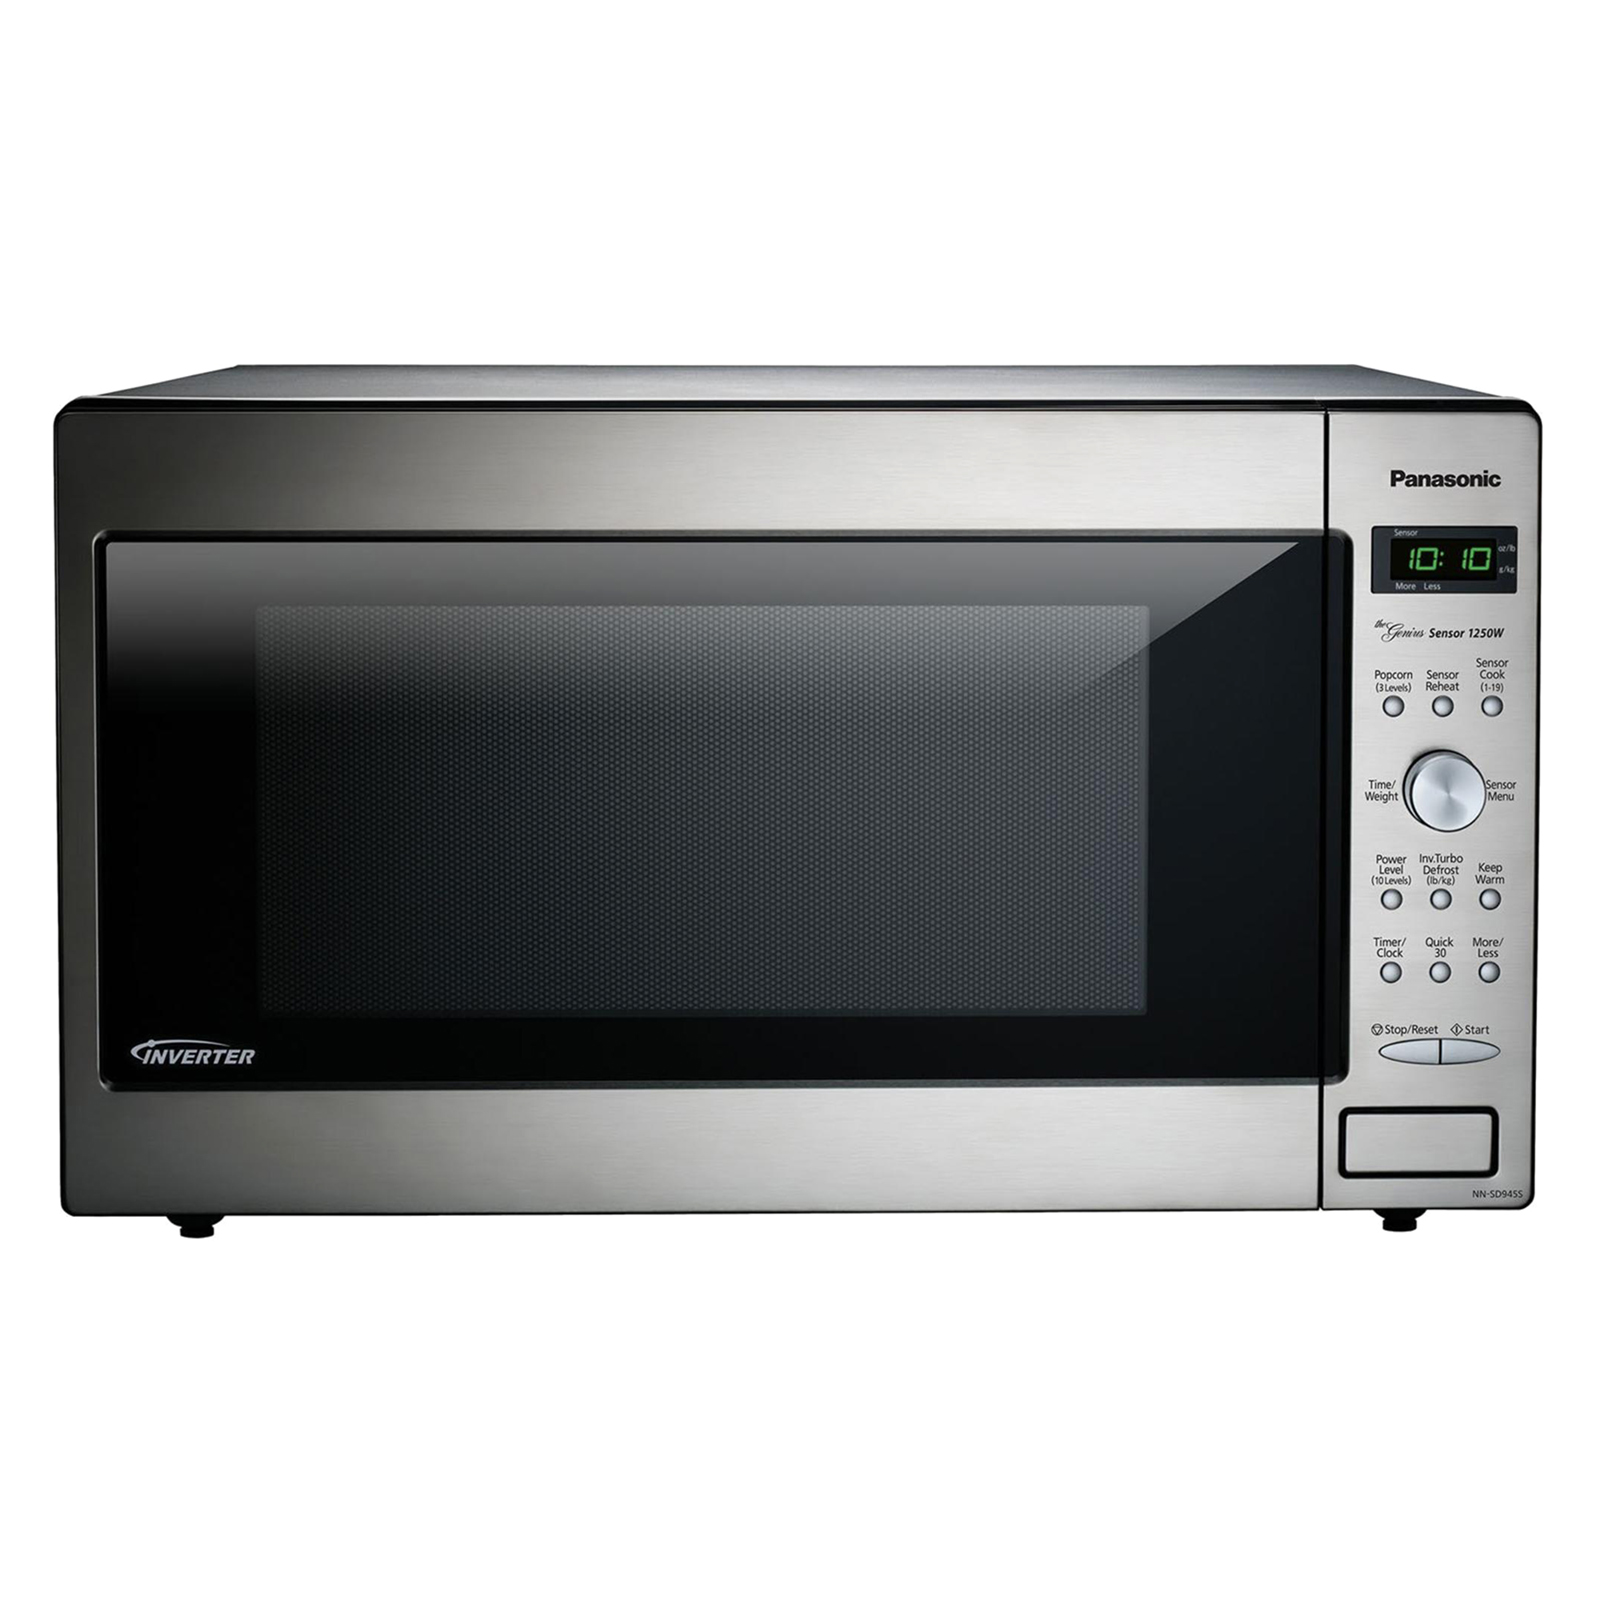 Panasonic Genius 4-in-1 Microwave with Air Fryer Review